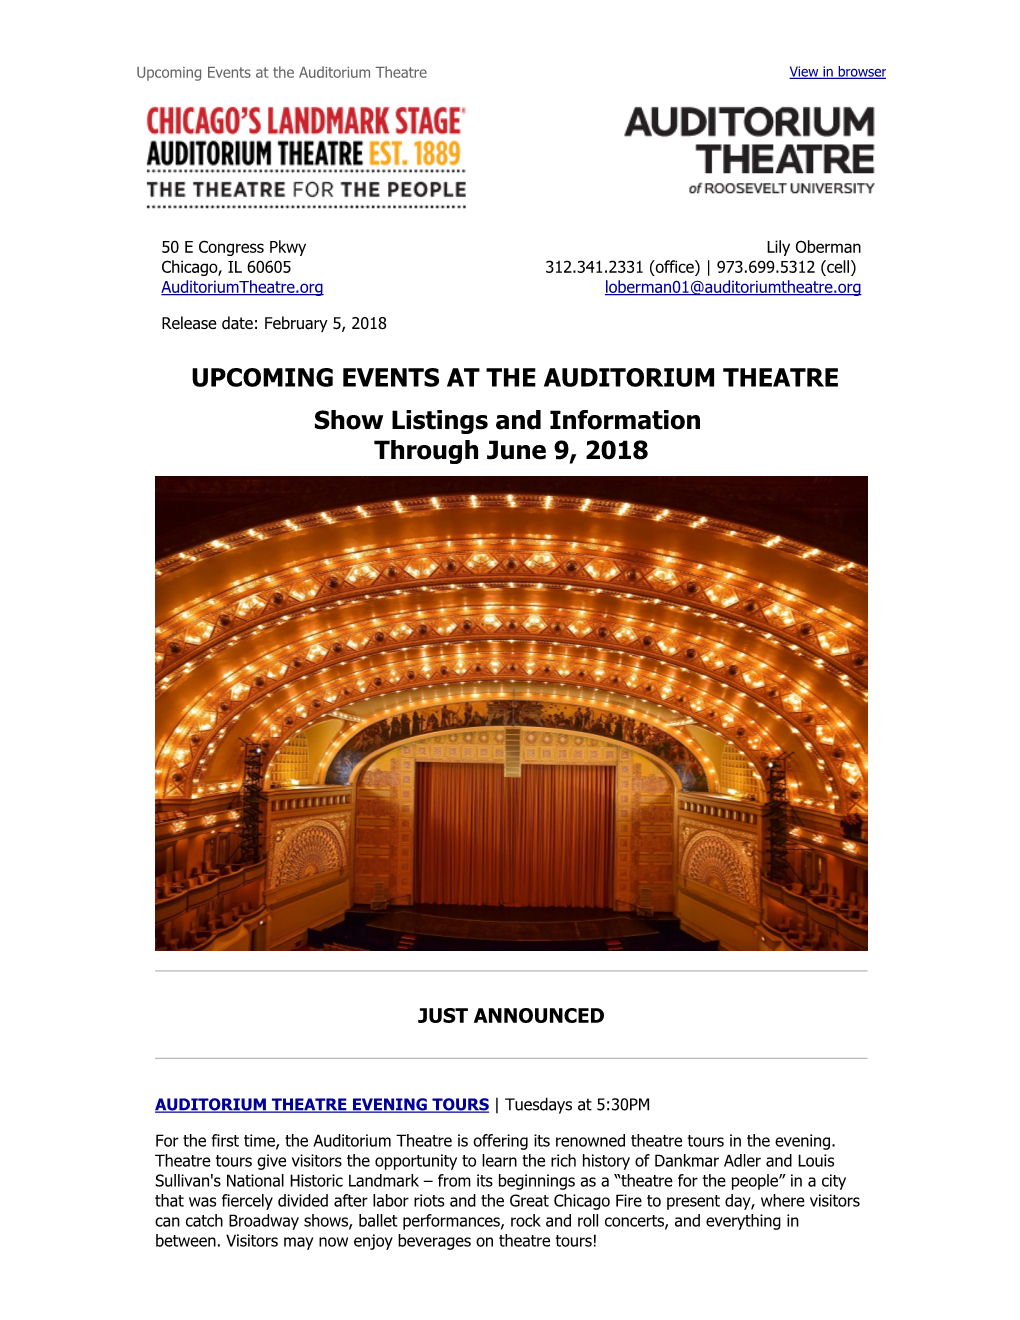 UPCOMING EVENTS at the AUDITORIUM THEATRE Show Listings and Information Through June 9, 2018